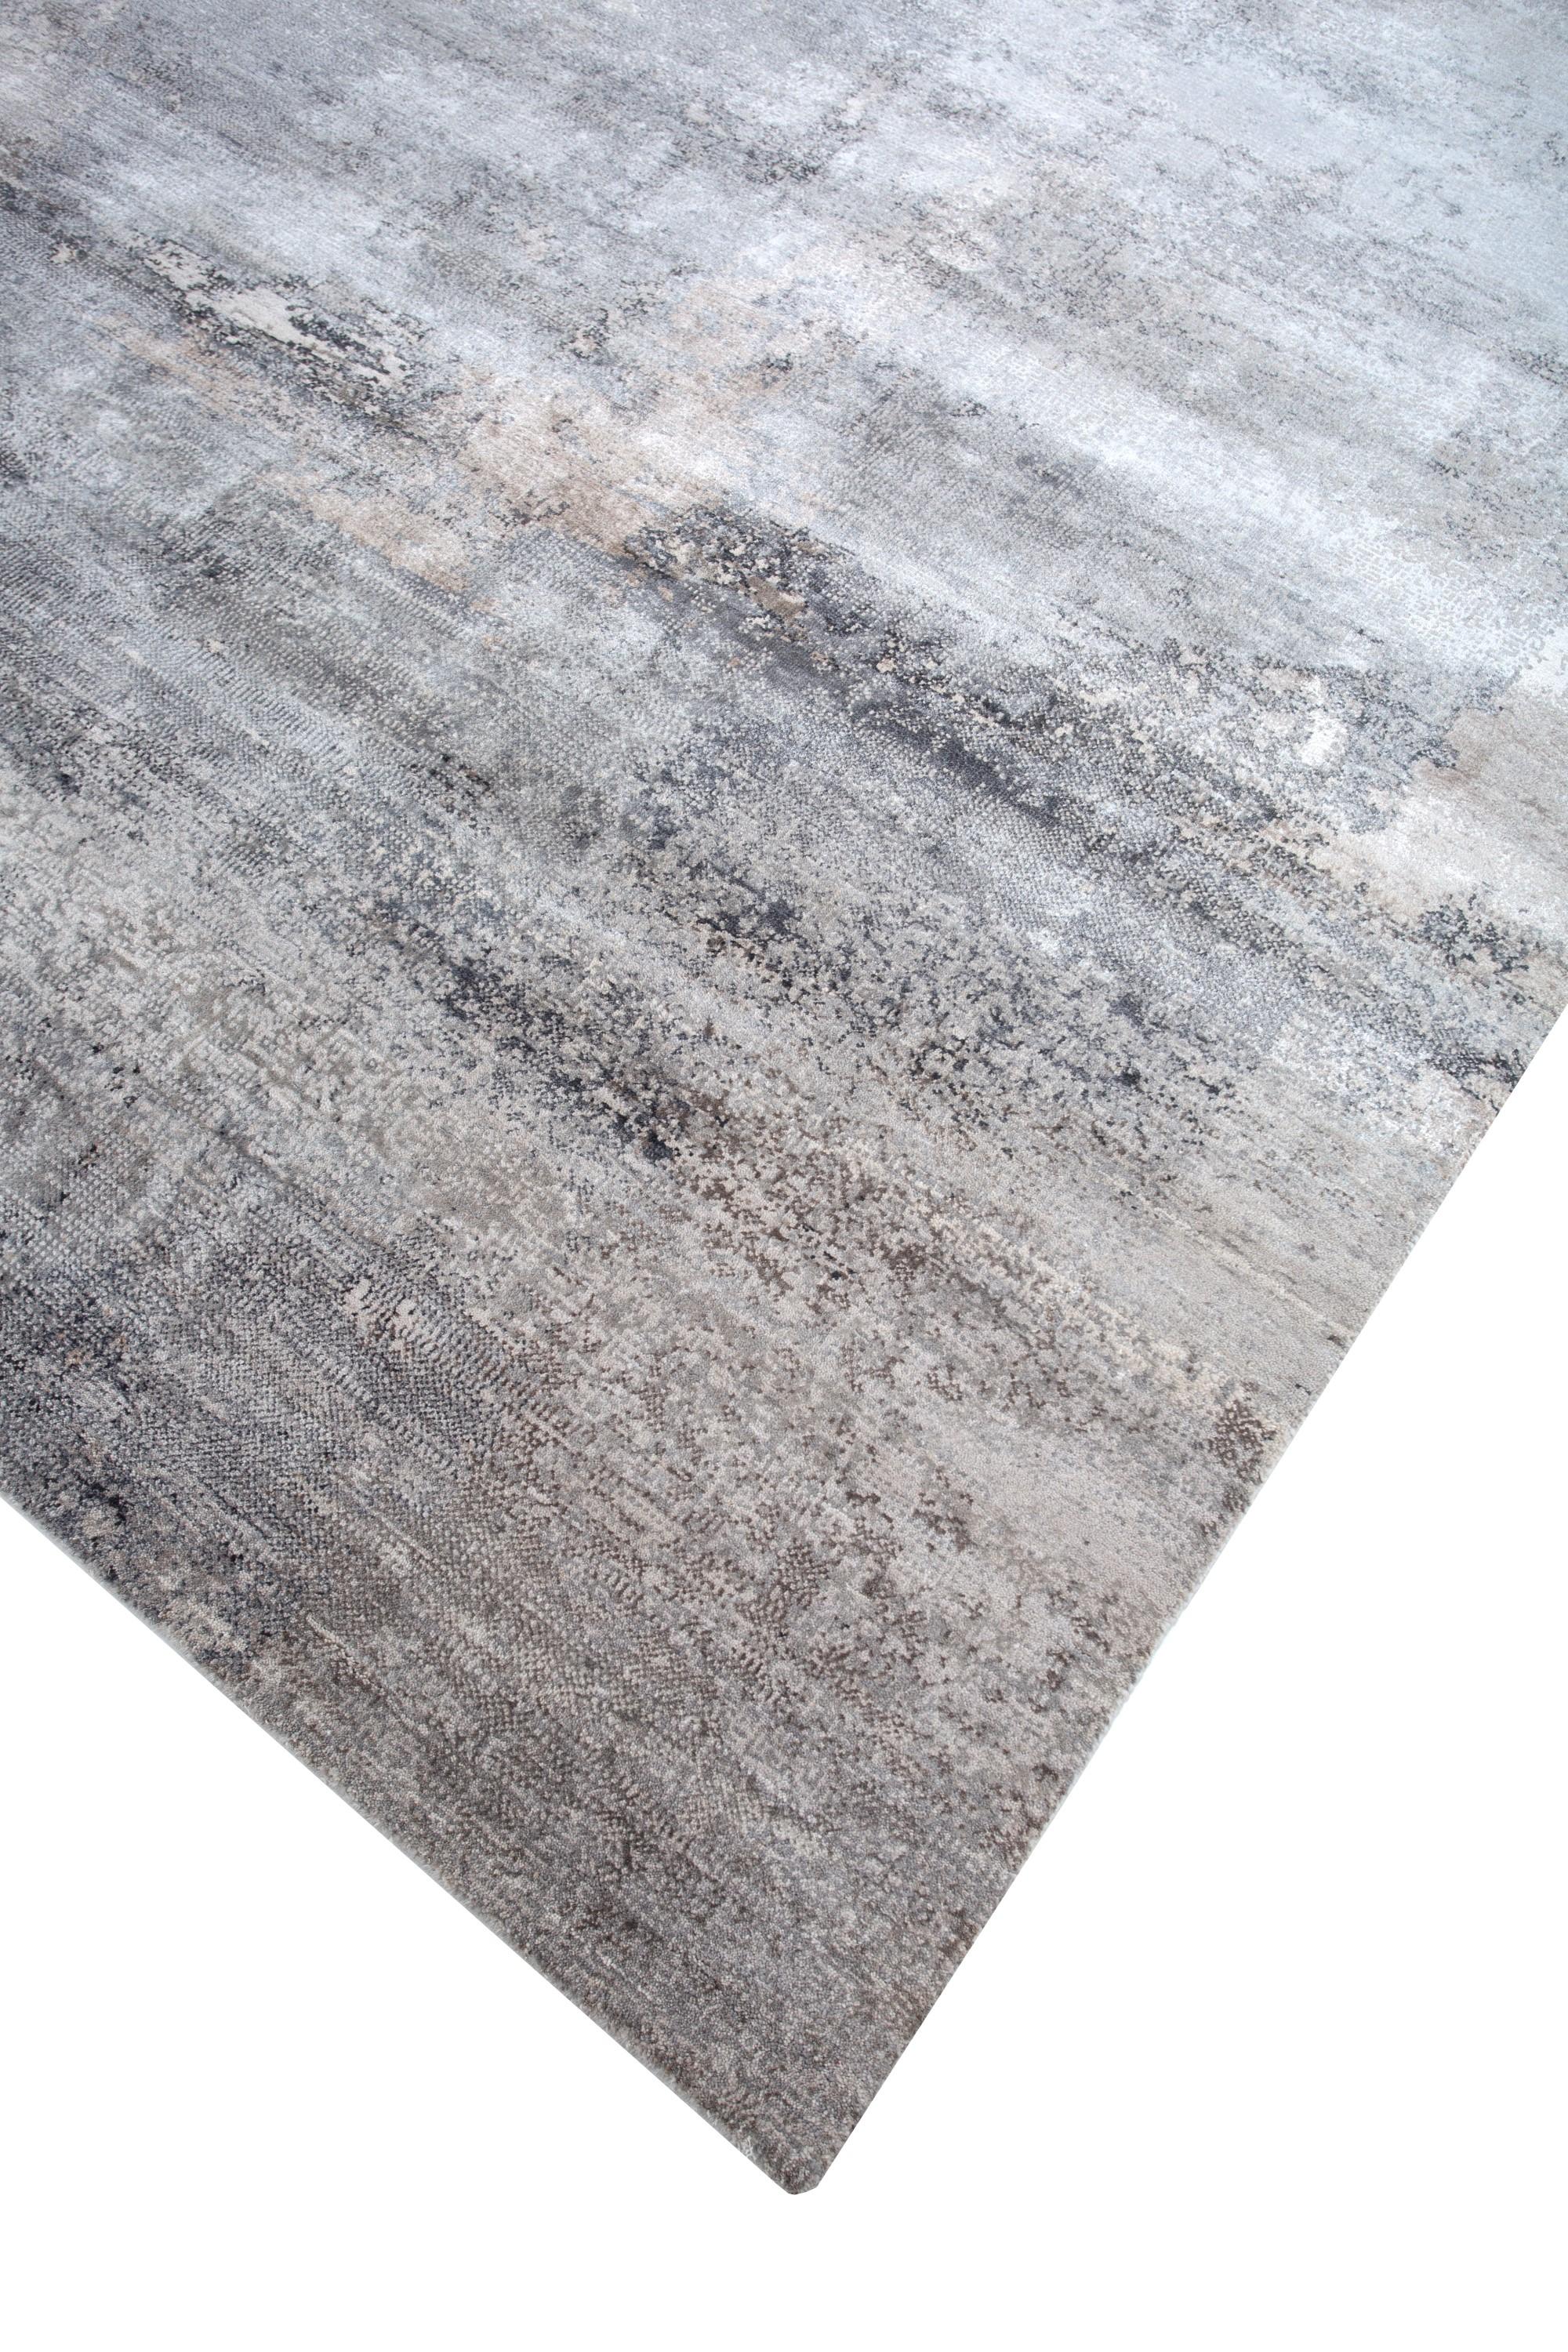 Modern Tranquil Prism Classic Gray & Ashwood 200X300 cm Handknotted Rug For Sale